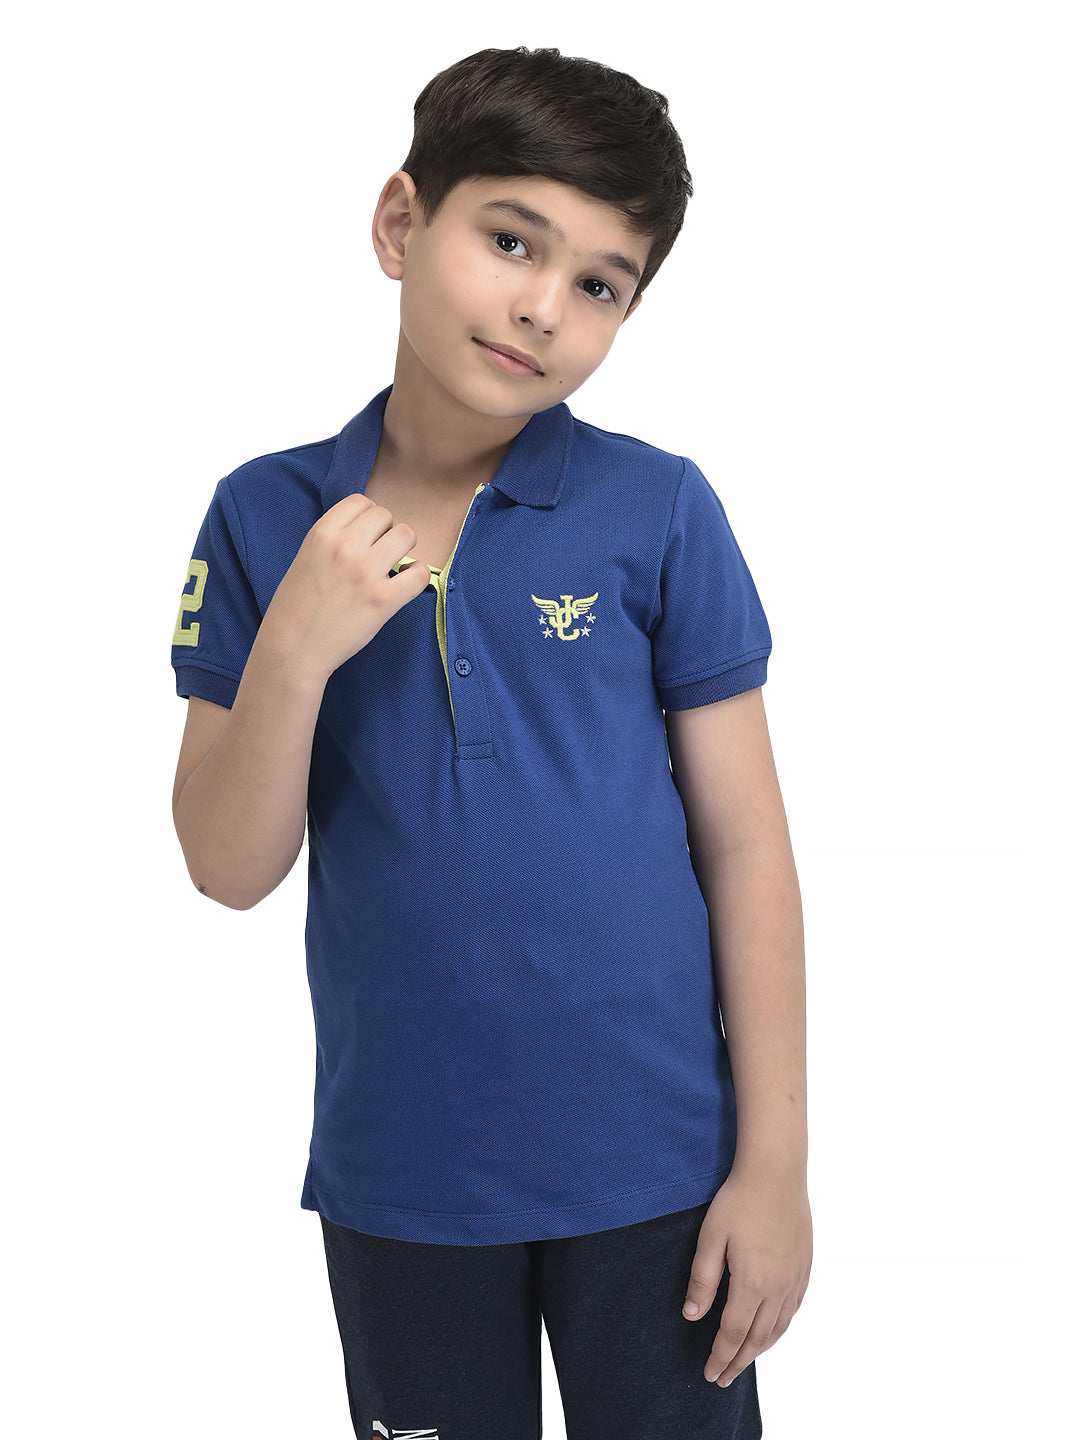 Boys Half Sleeve Solid Polo T-Shirt Pack of 2